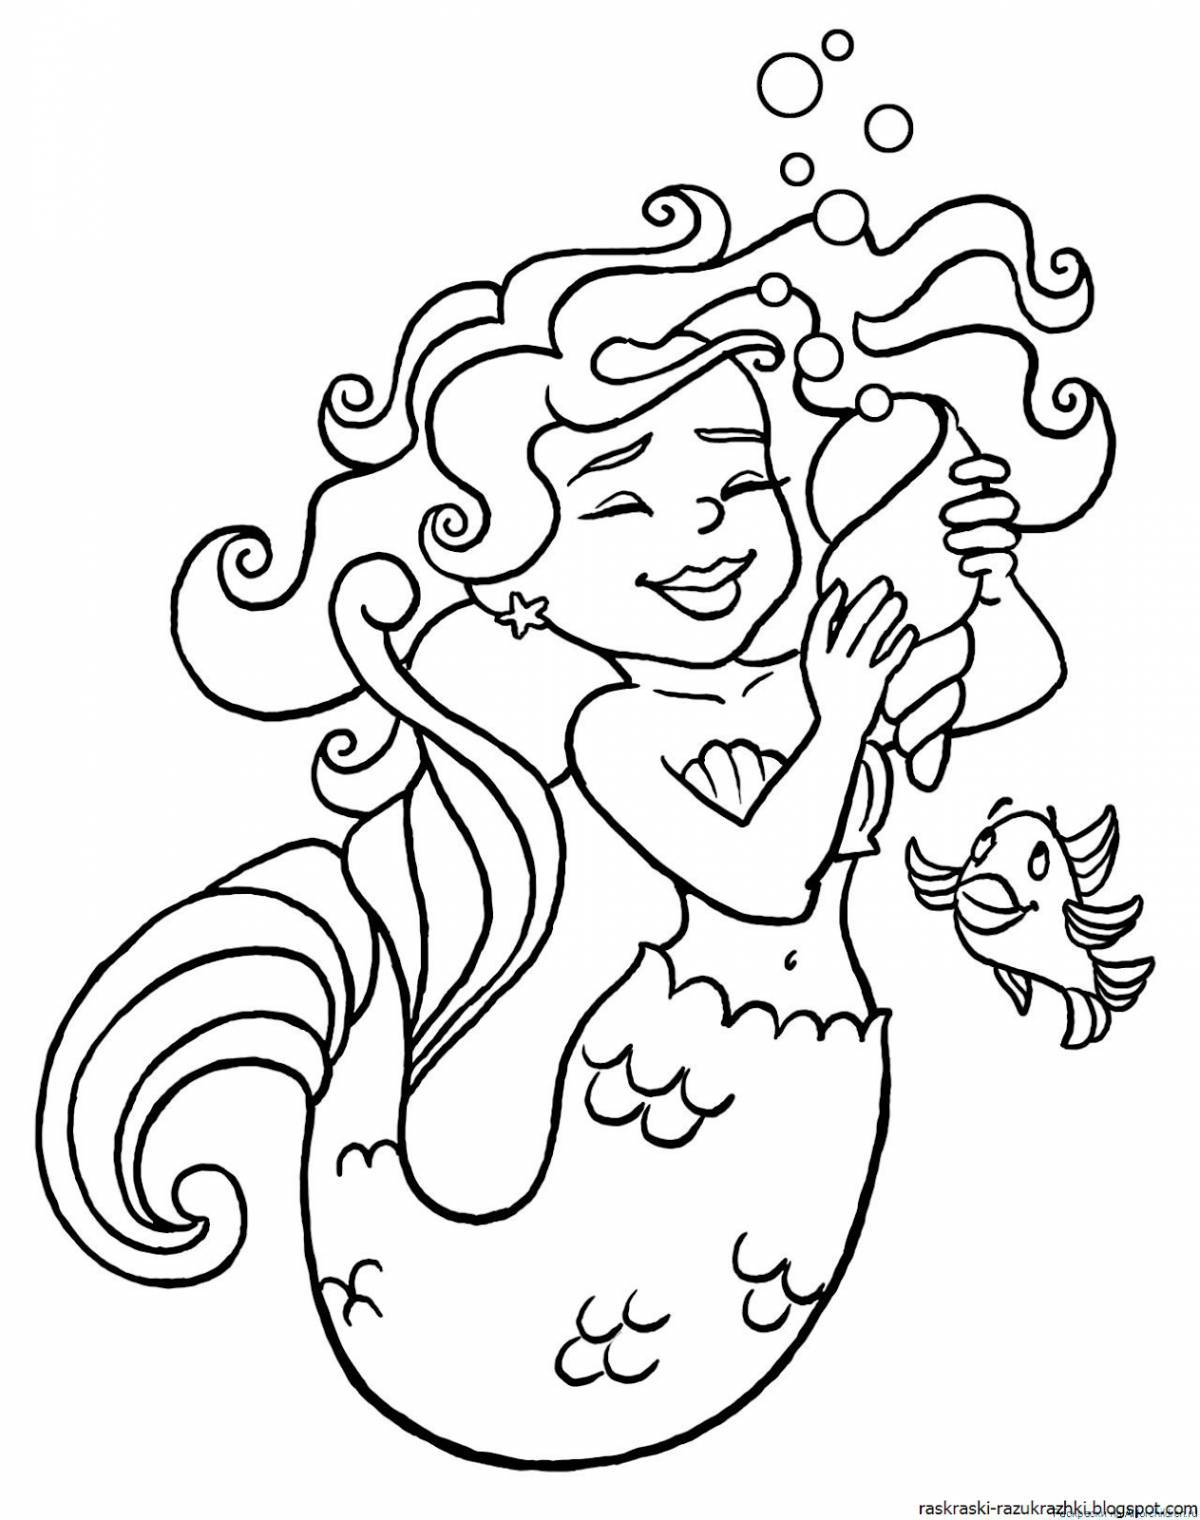 Animated little mermaid coloring book for kids